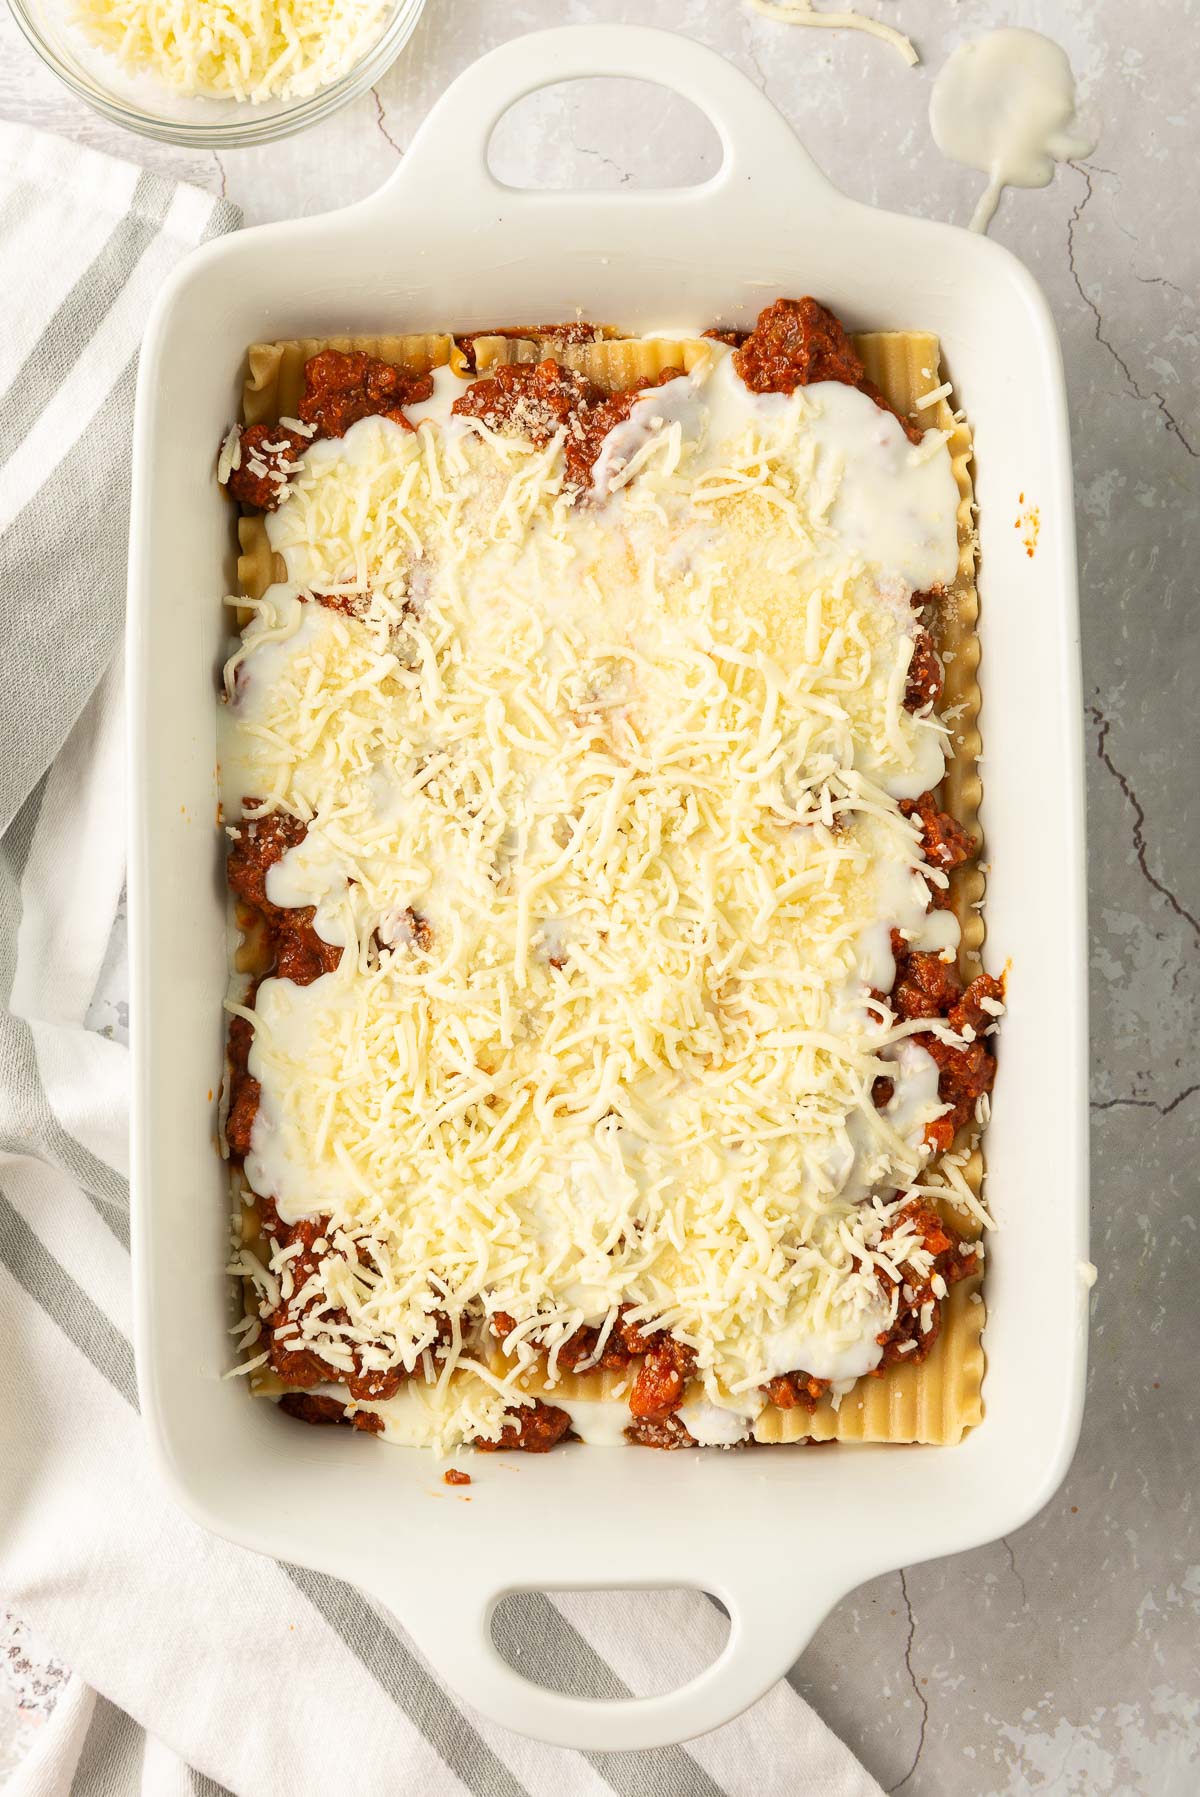 An uncooked lasagne alla bolognese in a white baking dish.